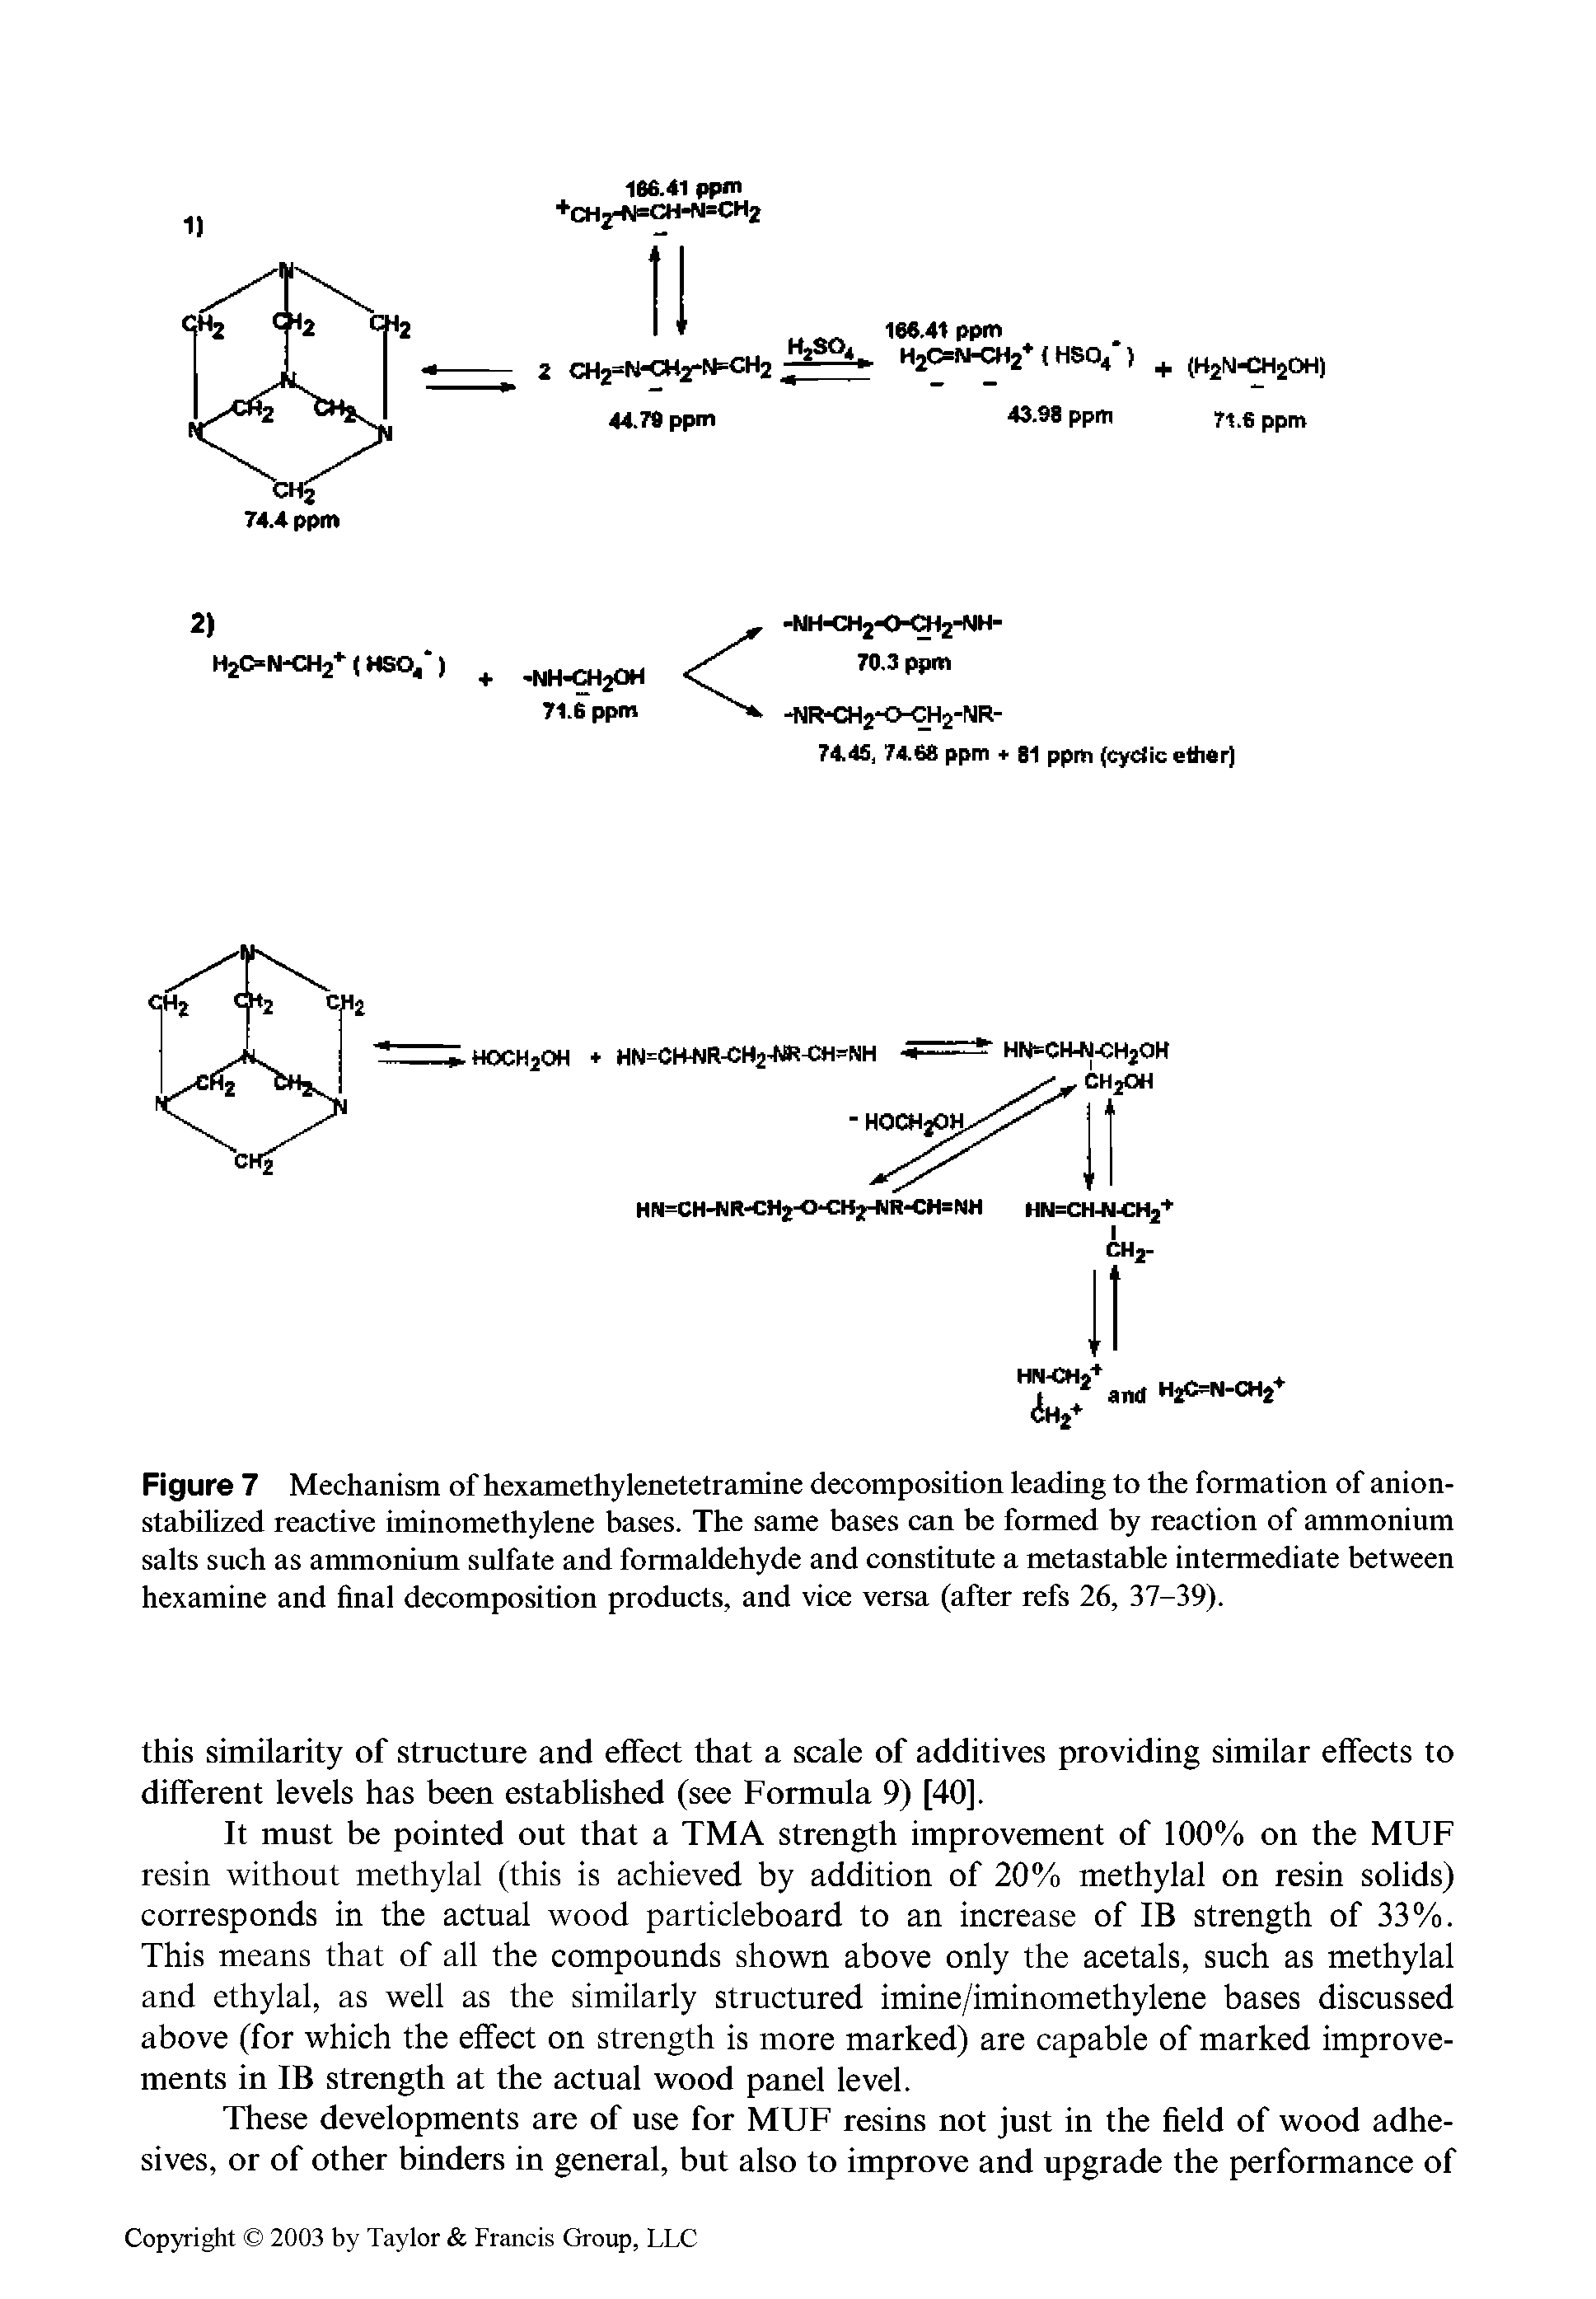 Figure 7 Mechanism of hexamethylenetetramine decomposition leading to the formation of anion-stabilized reactive iminomethylene bases. The same bases can be formed by reaction of ammonium salts such as ammonium sulfate and formaldehyde and constitute a metastable intermediate between hexamine and final decomposition products, and vice versa (after refs 26, 37-39).